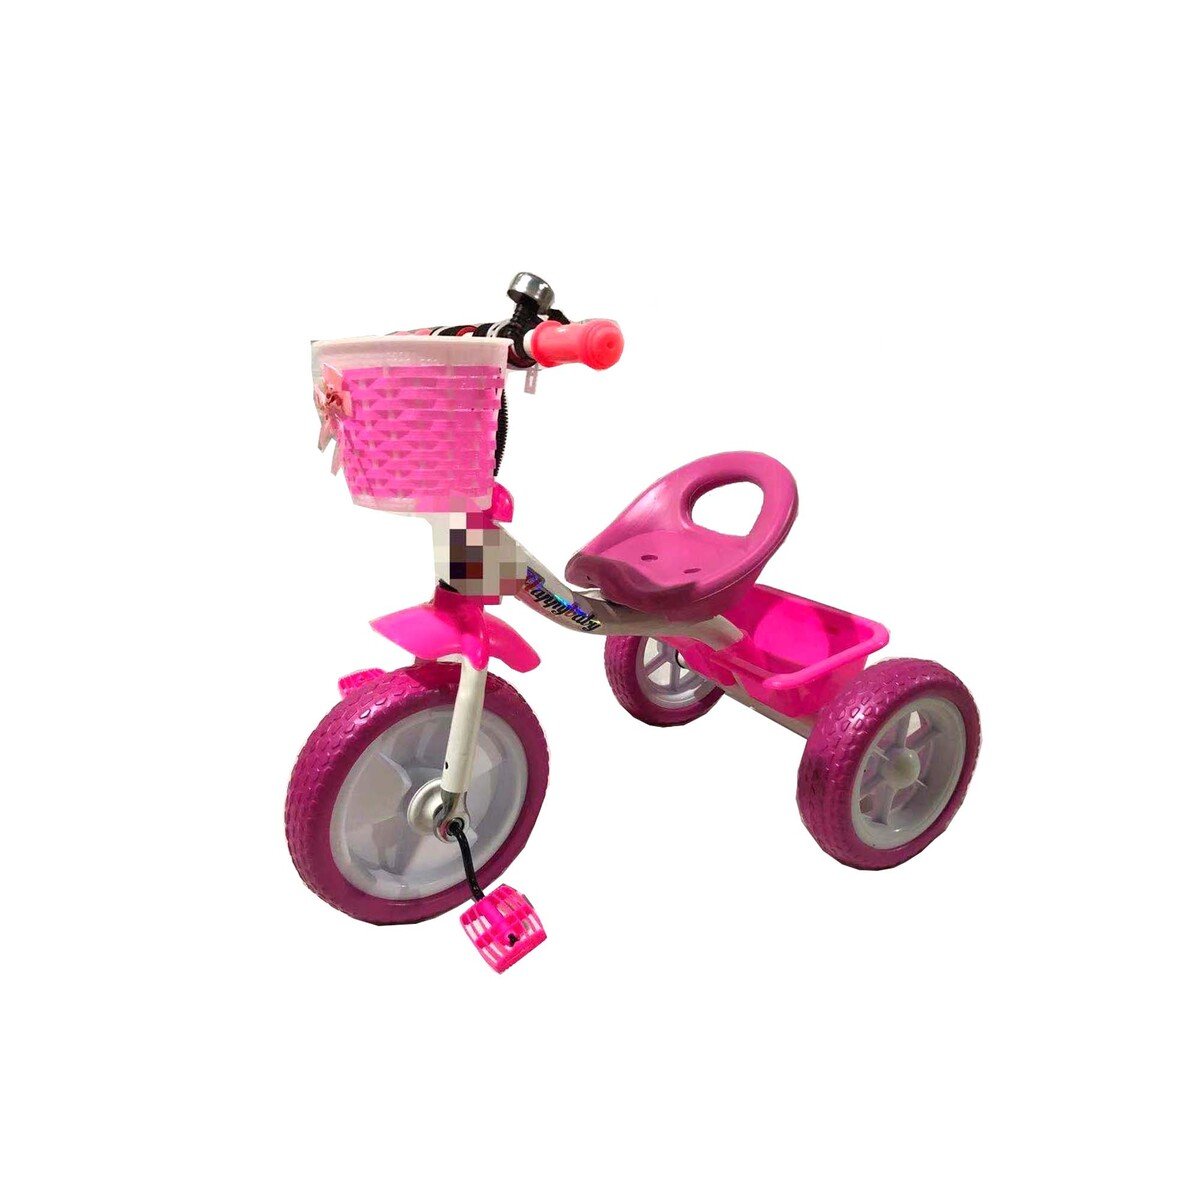 Skid Fusion Kids Tricycle 818 Pink